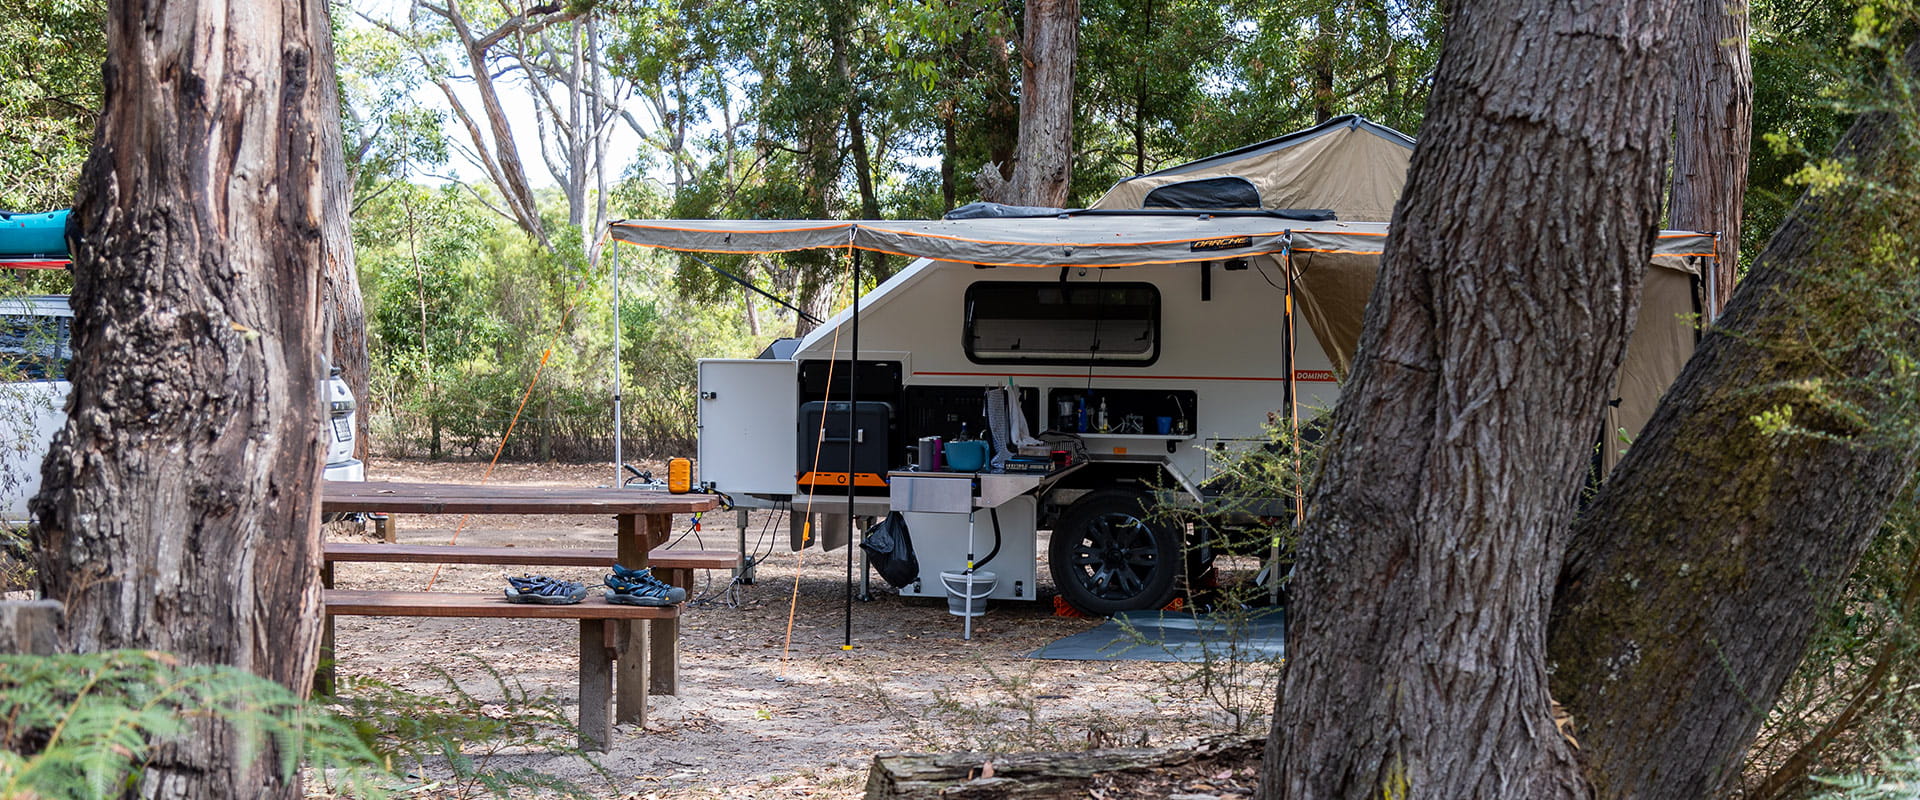 A camper trailer set up next to a picnic table in rich dry eucalypt forest.